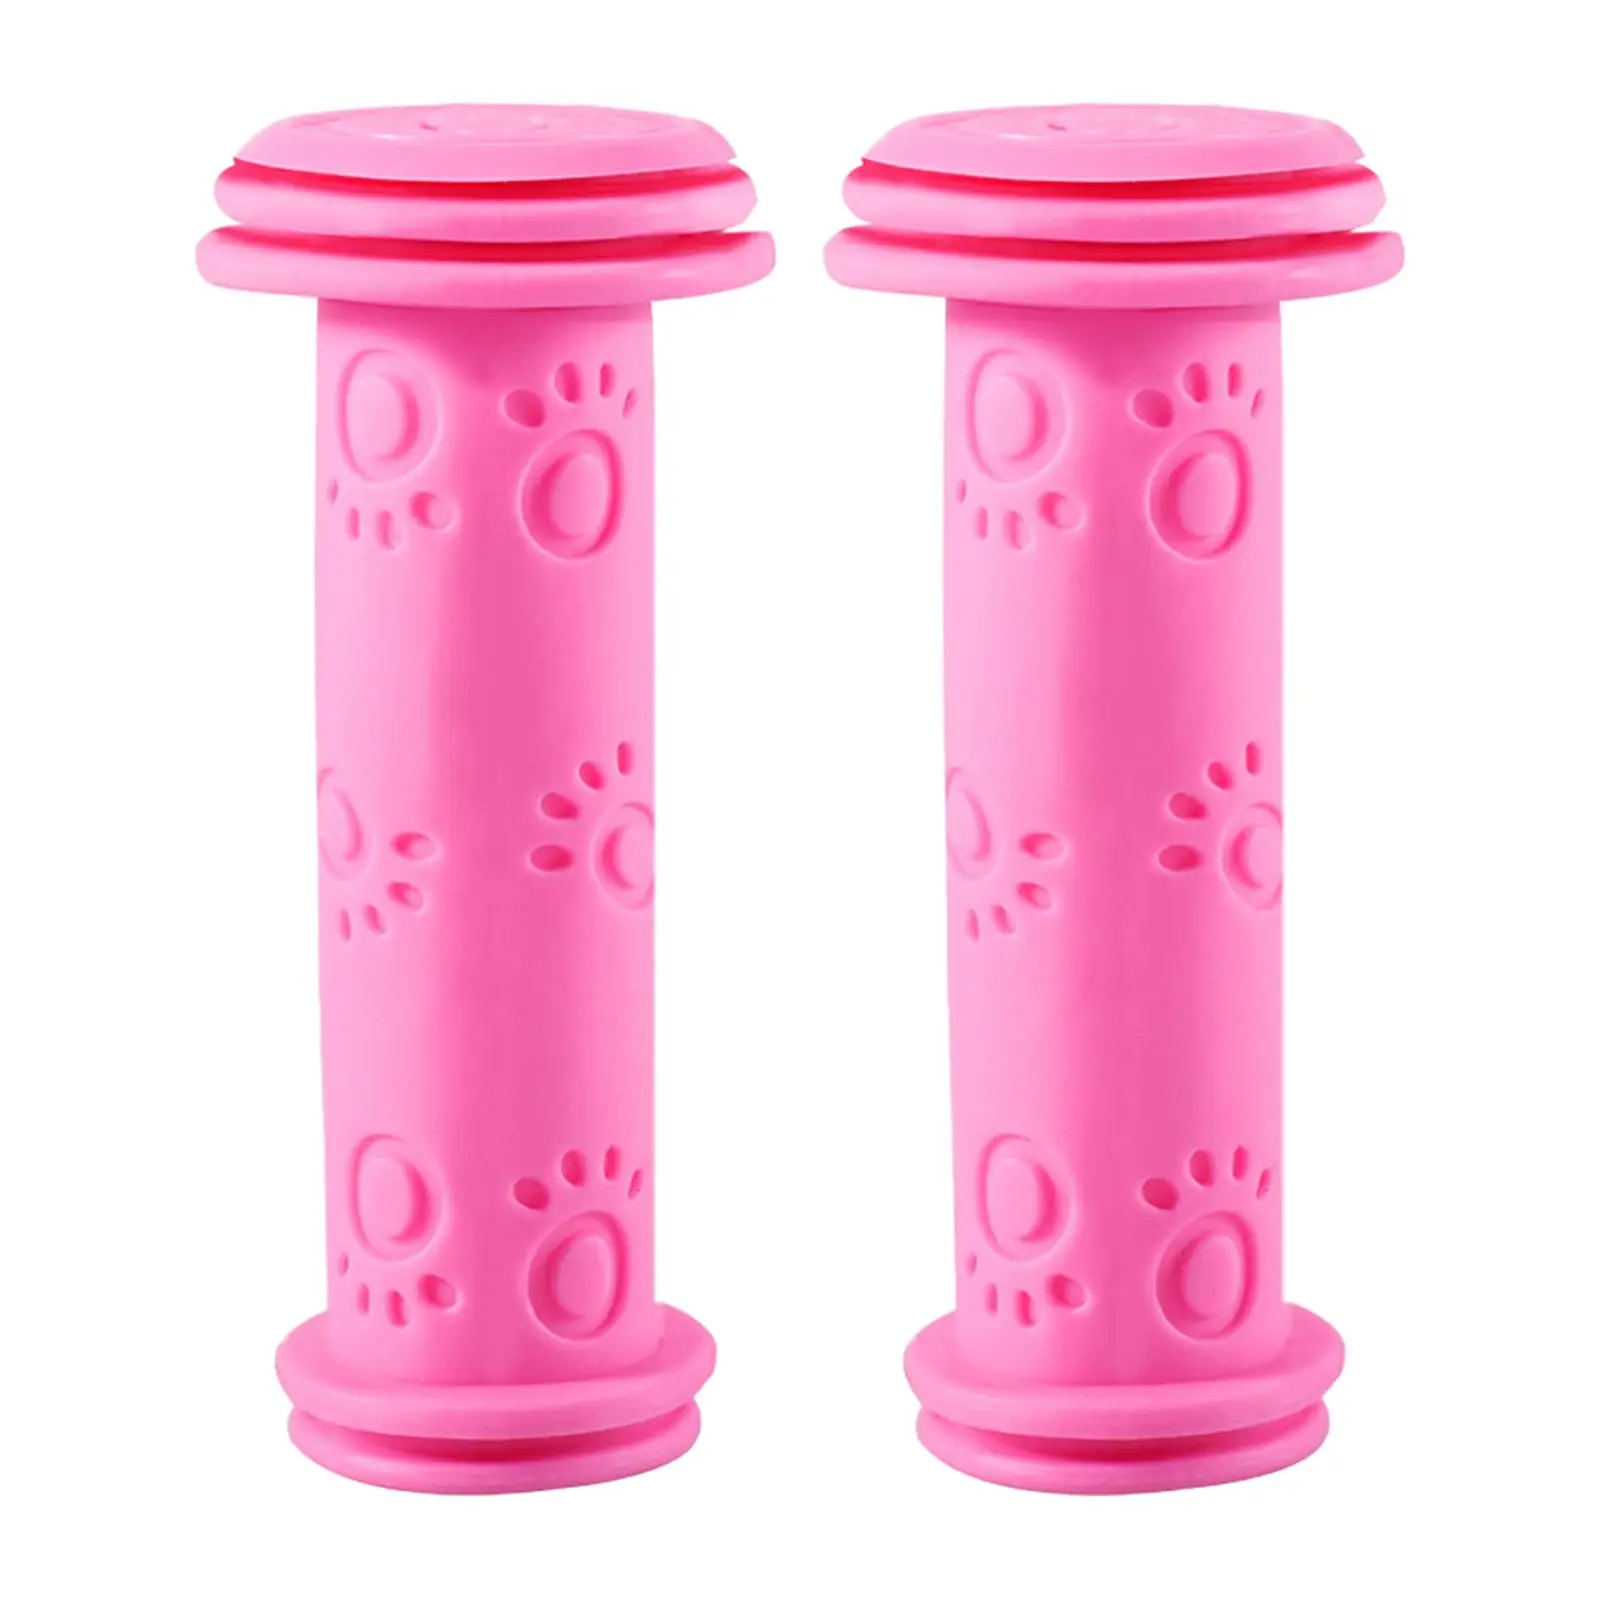 Bicycle Handlebar Grips 22mm Comfortable for Kids Bike Tricycle Scooter